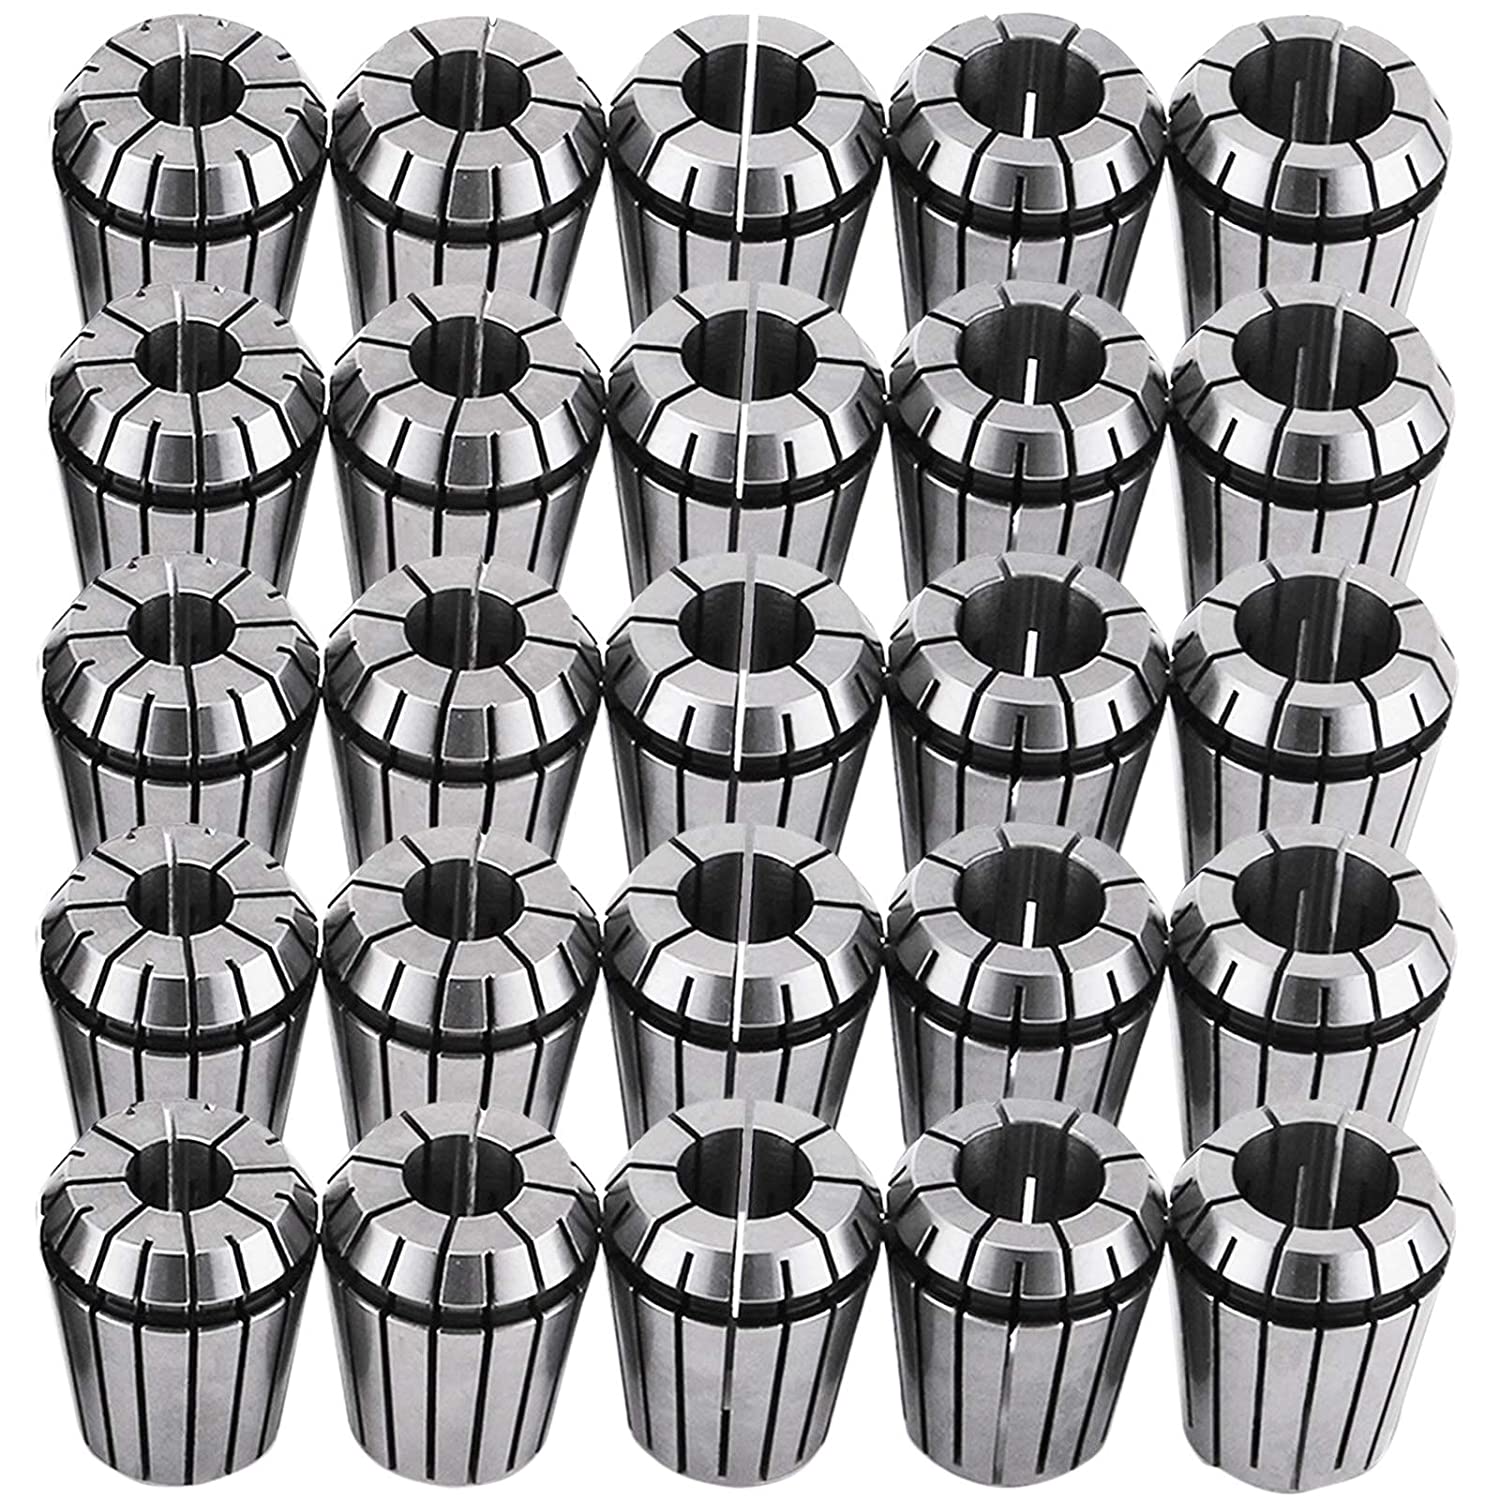 findmall  ER32 Collet Set 25Pcs ER32 Collet Chuck Spring Collet Set CNC Engraving Milling Lathe Chuck Tool 1/16-13/16 Inch Fit for CNC Engraving Machine and Milling Lathe Tool FINDMALLPARTS